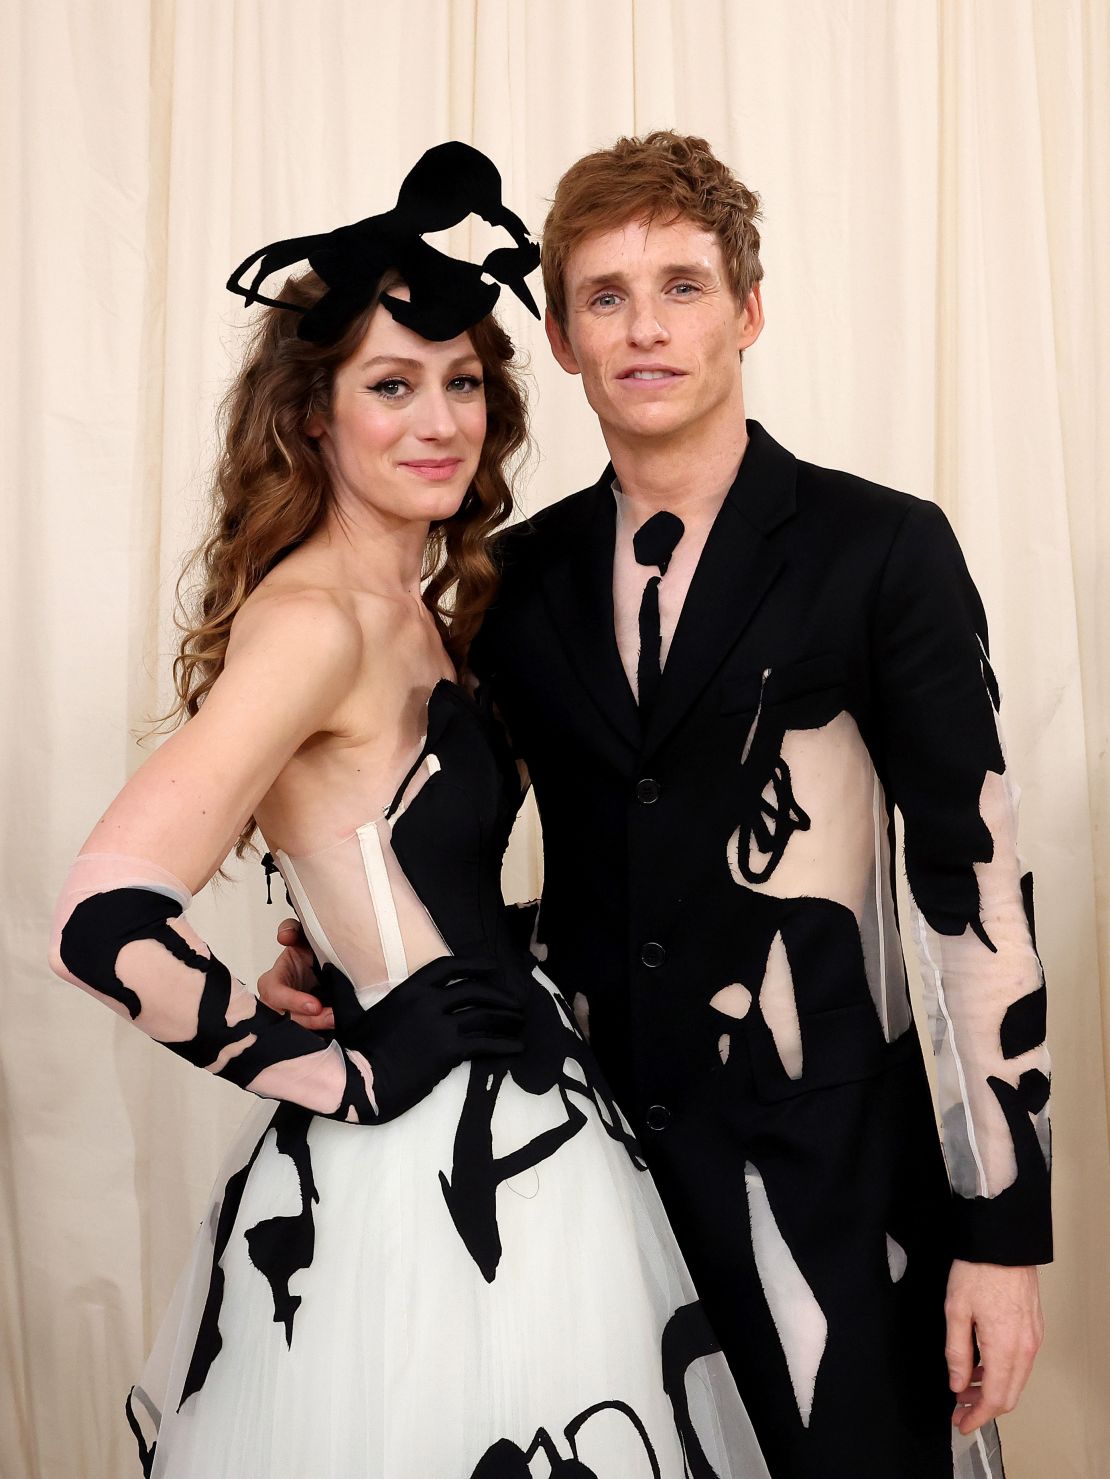 Hannah Bagshawe and Eddie Redmayne attend the event in matching Steve O Smith designs. Redmayne's suit featured large cut-outs filled with sheer flesh-toned fabric.